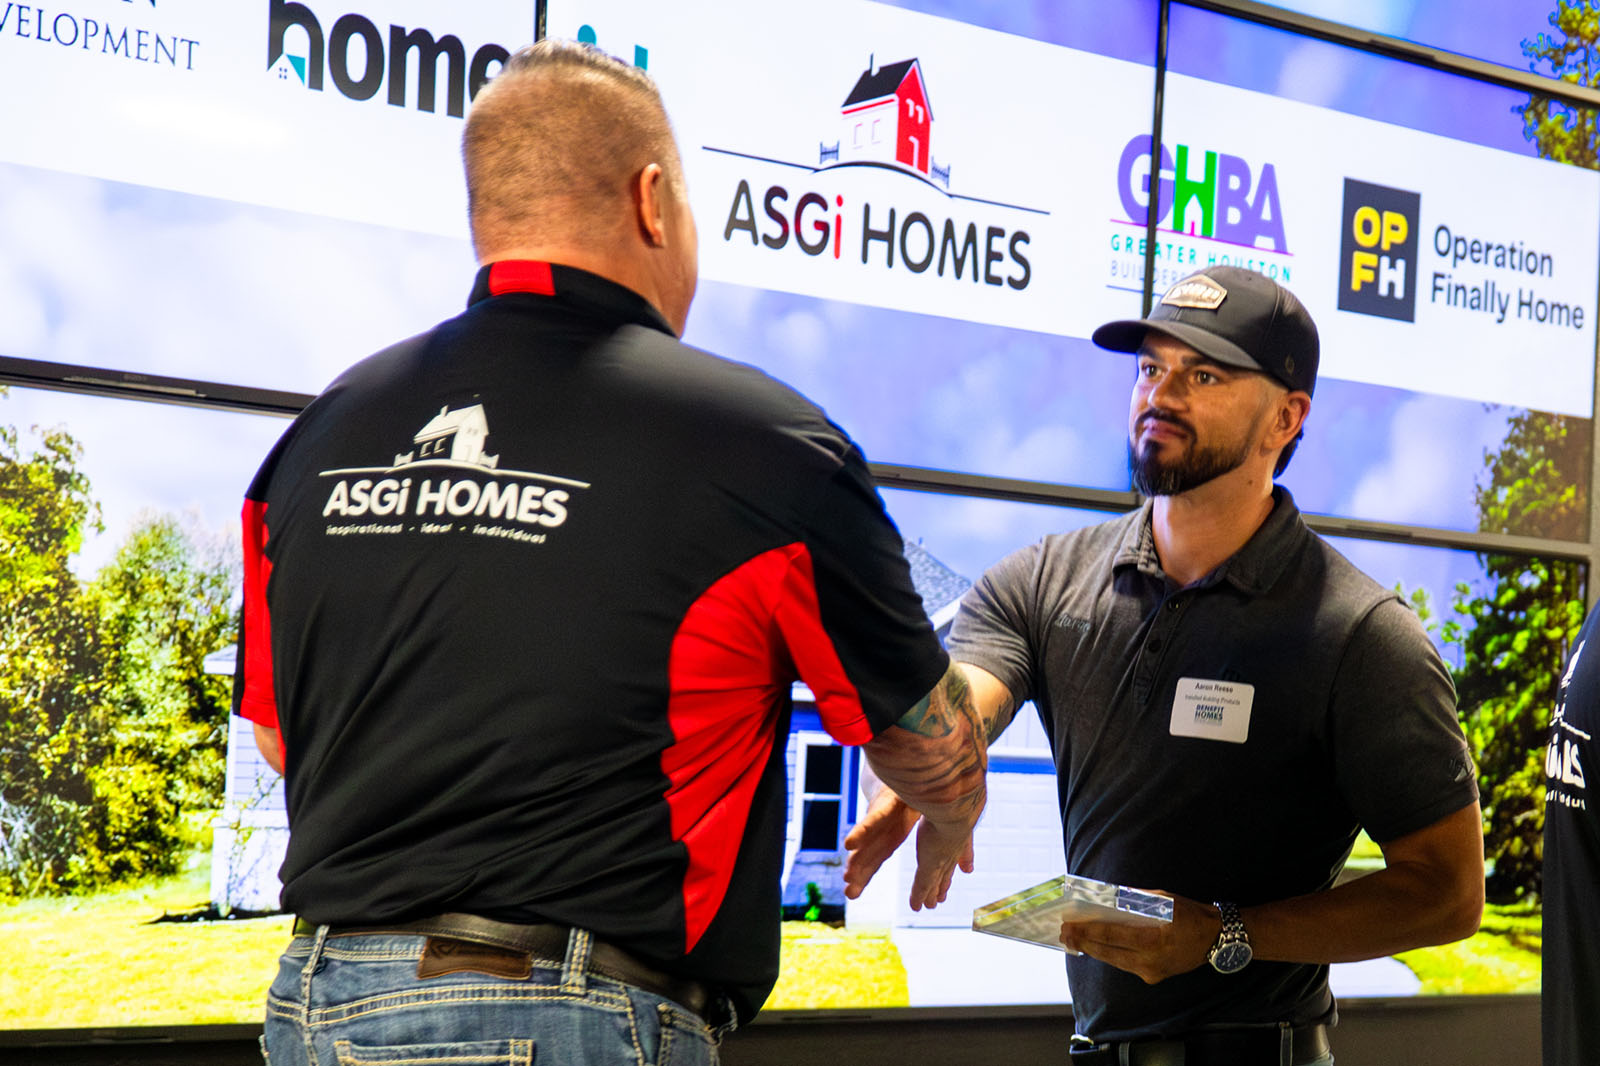 Featured image for “ASGi Homes Honors Vendors and Suppliers Donating to Benefit Home”